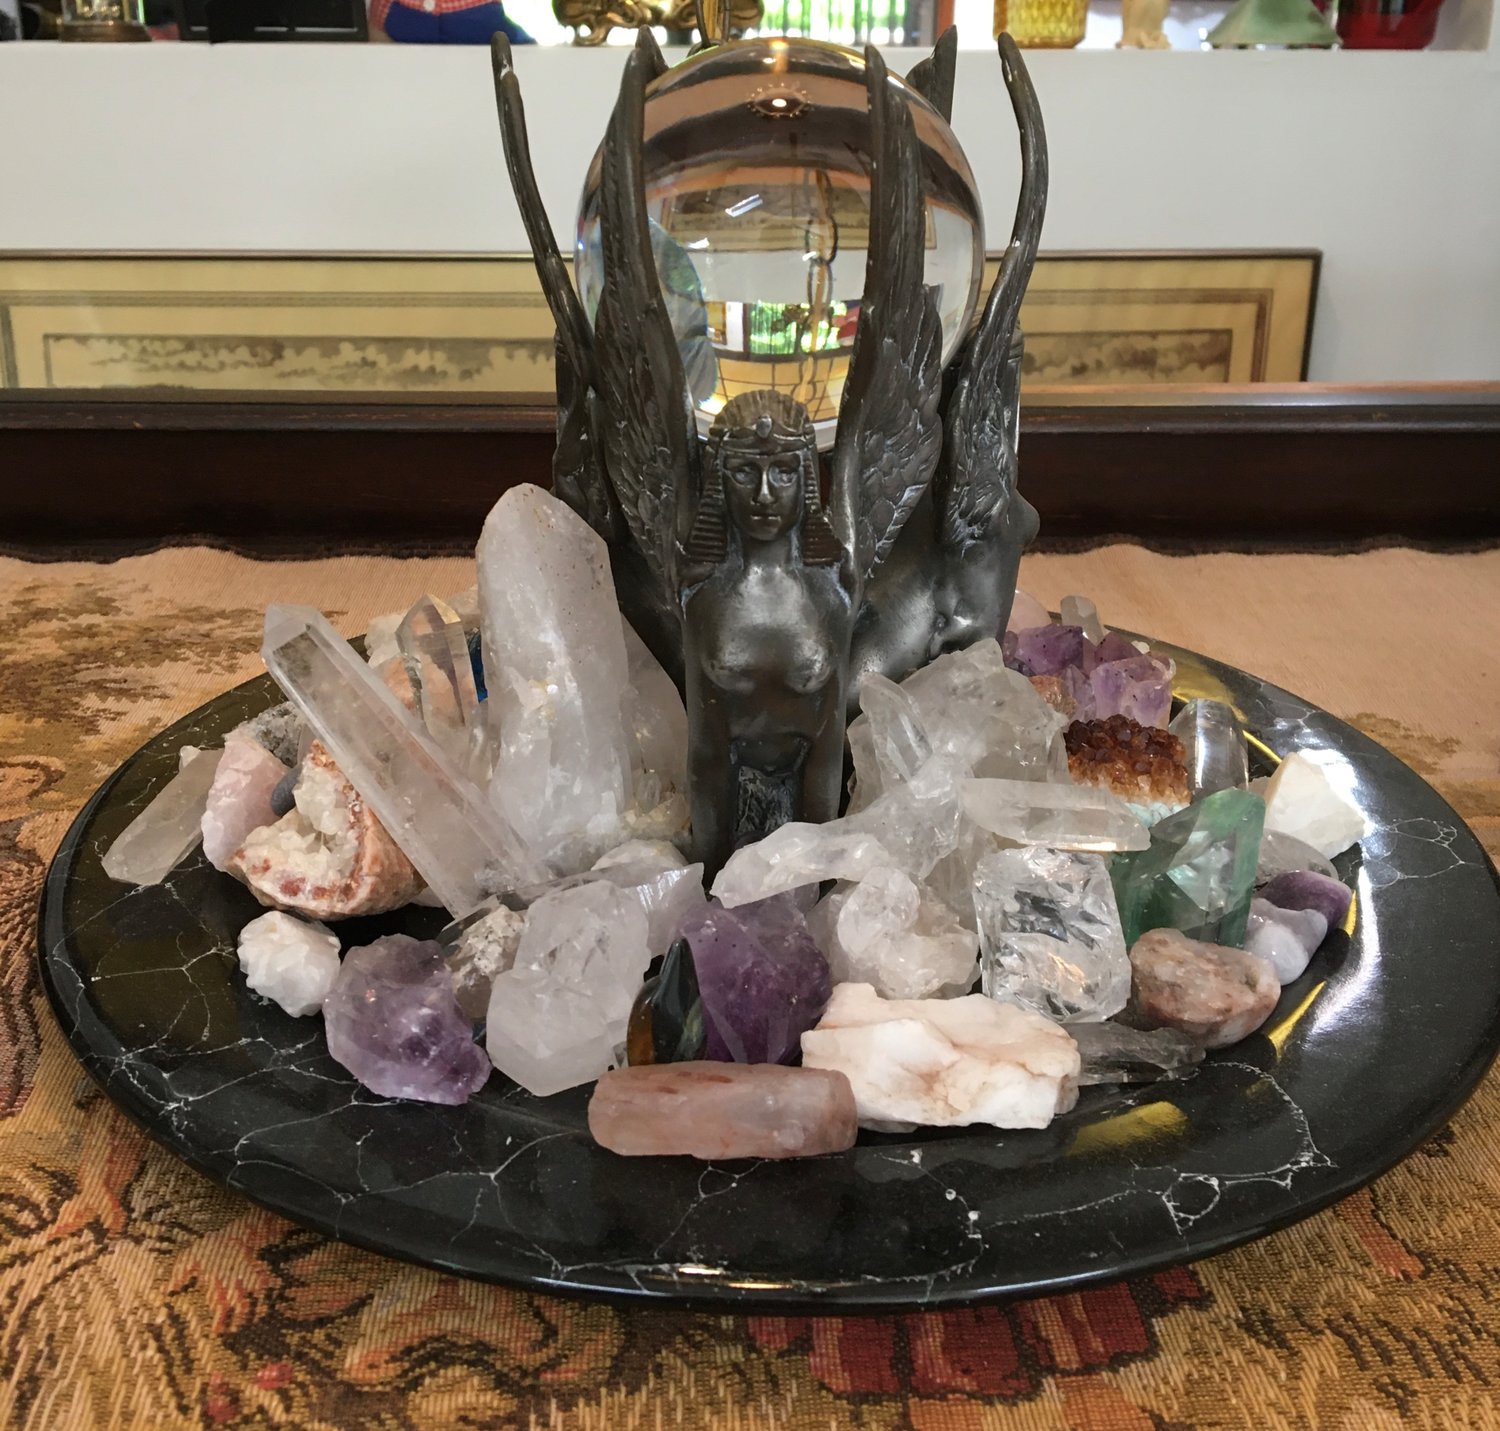 Fun Fact: Even though I own a crystal ball, I’ve not met my spirit guide, nor can I predict what Dharma and I will have for dinner.